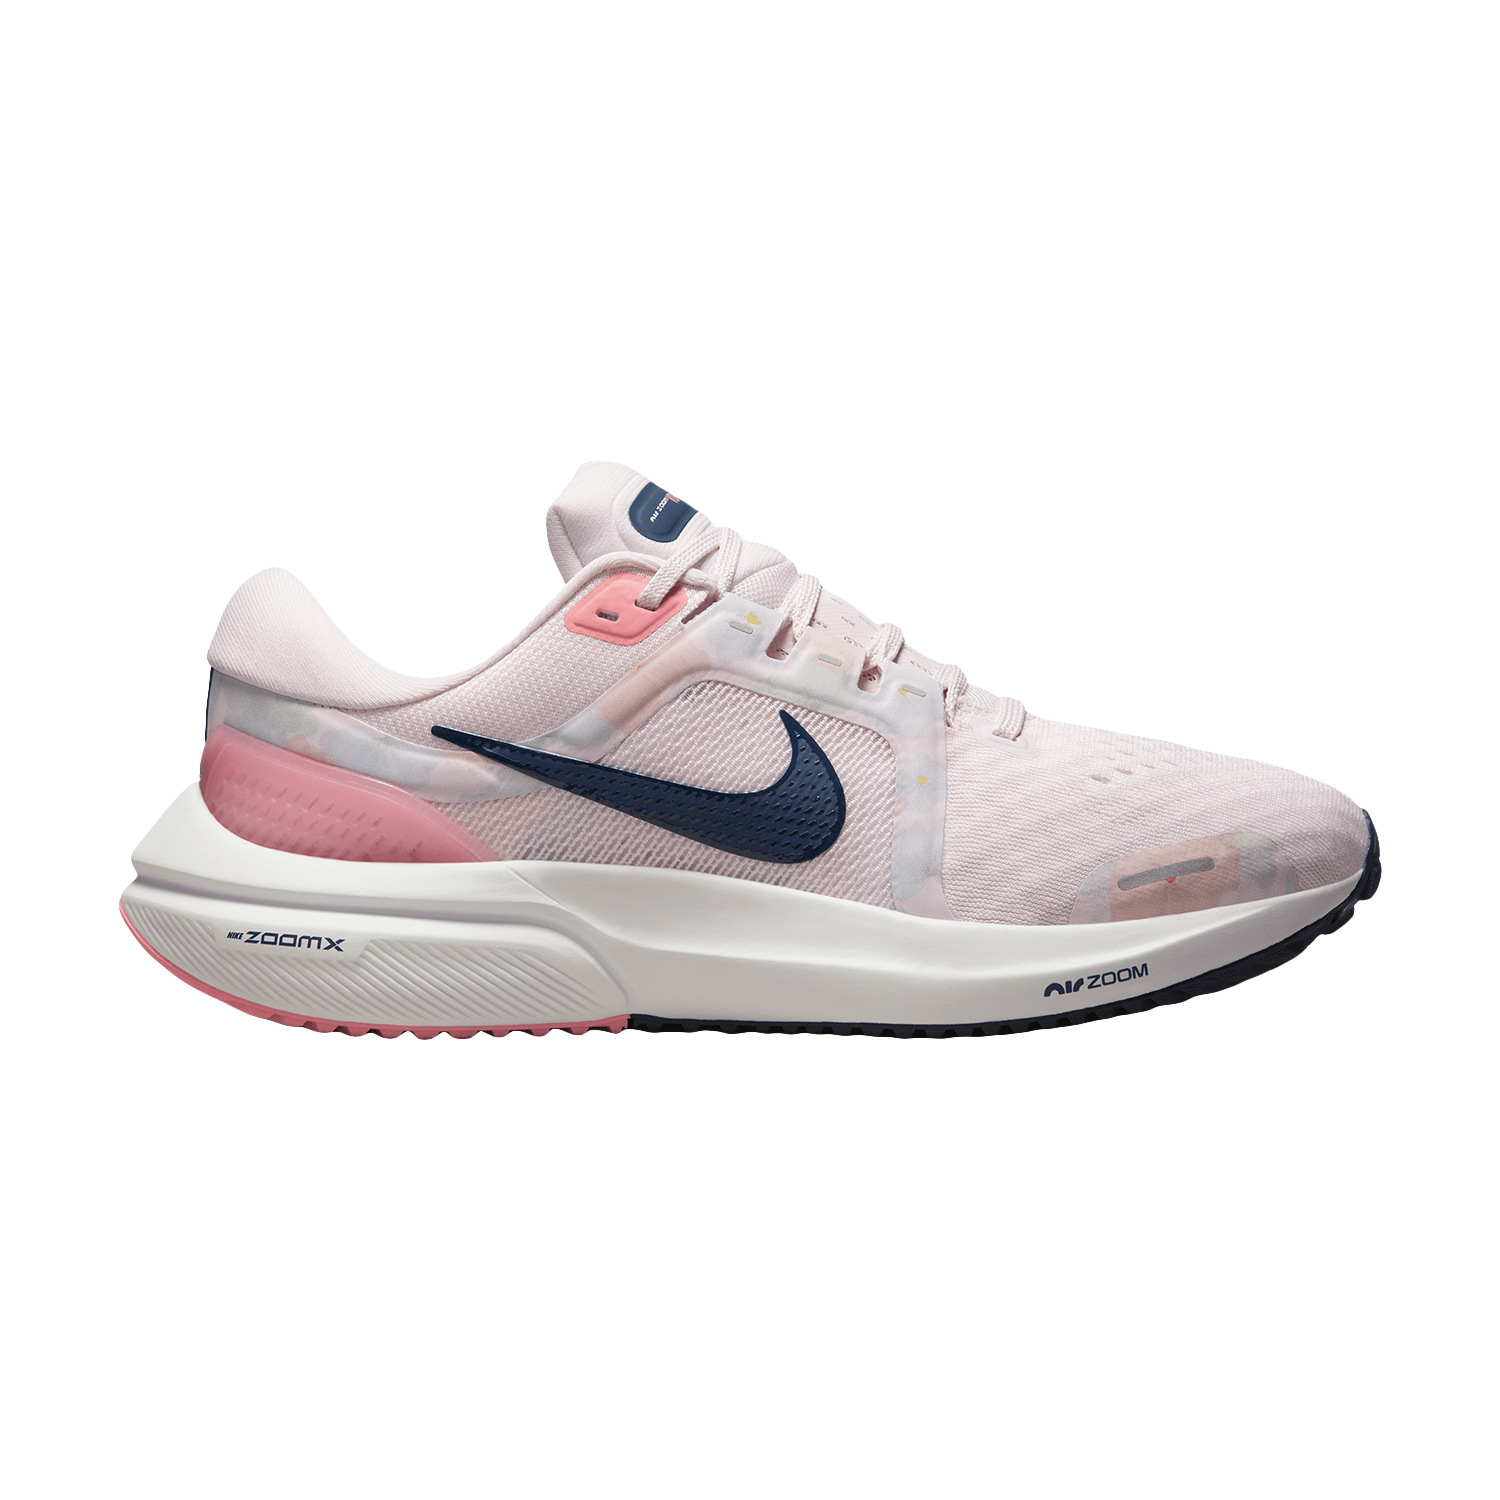 Nike Zoom Vomero 16 Women's Running Shoes - Pearl Pink